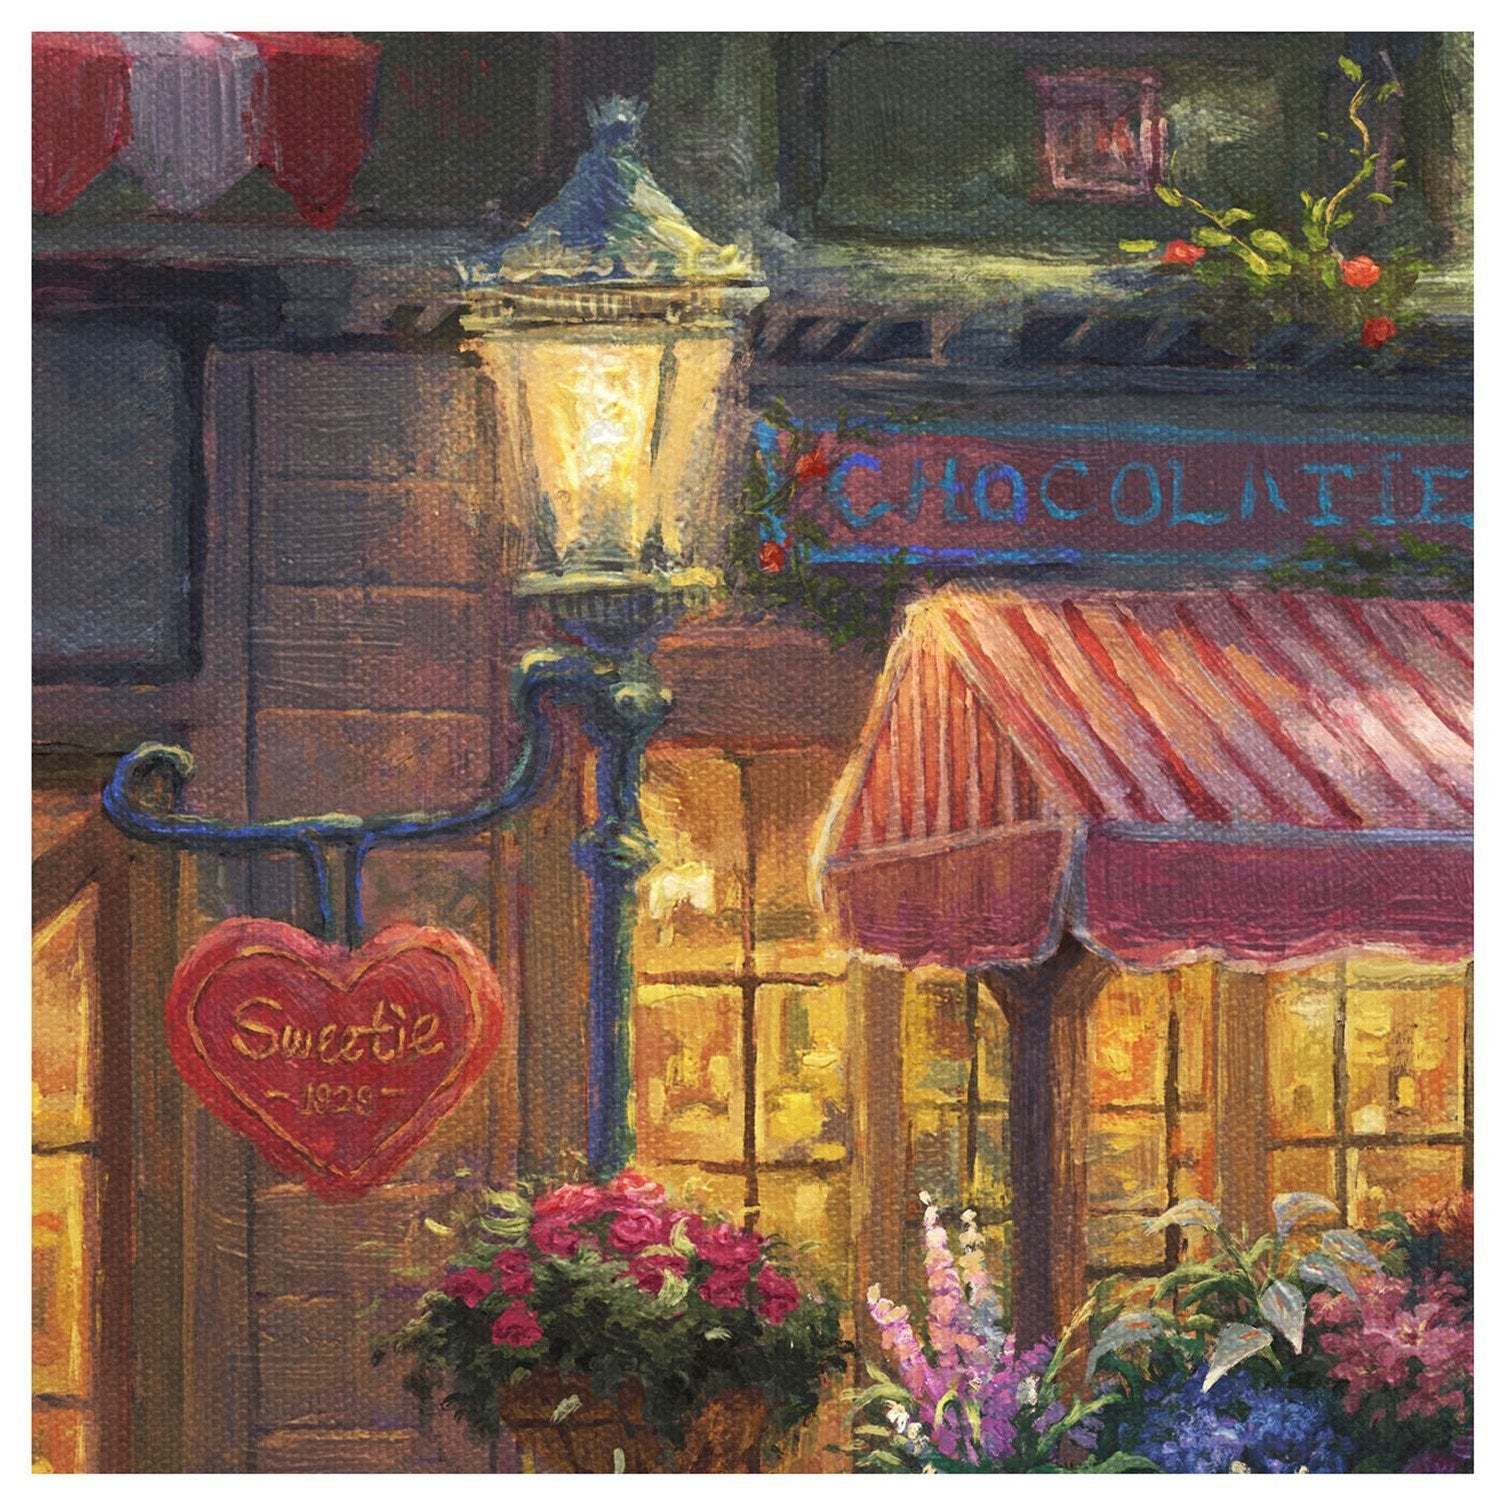 On the far left side of the Thomas Kinkade Studios painting is a heart-shaped sign that says “Sweetie 1929” - closeup